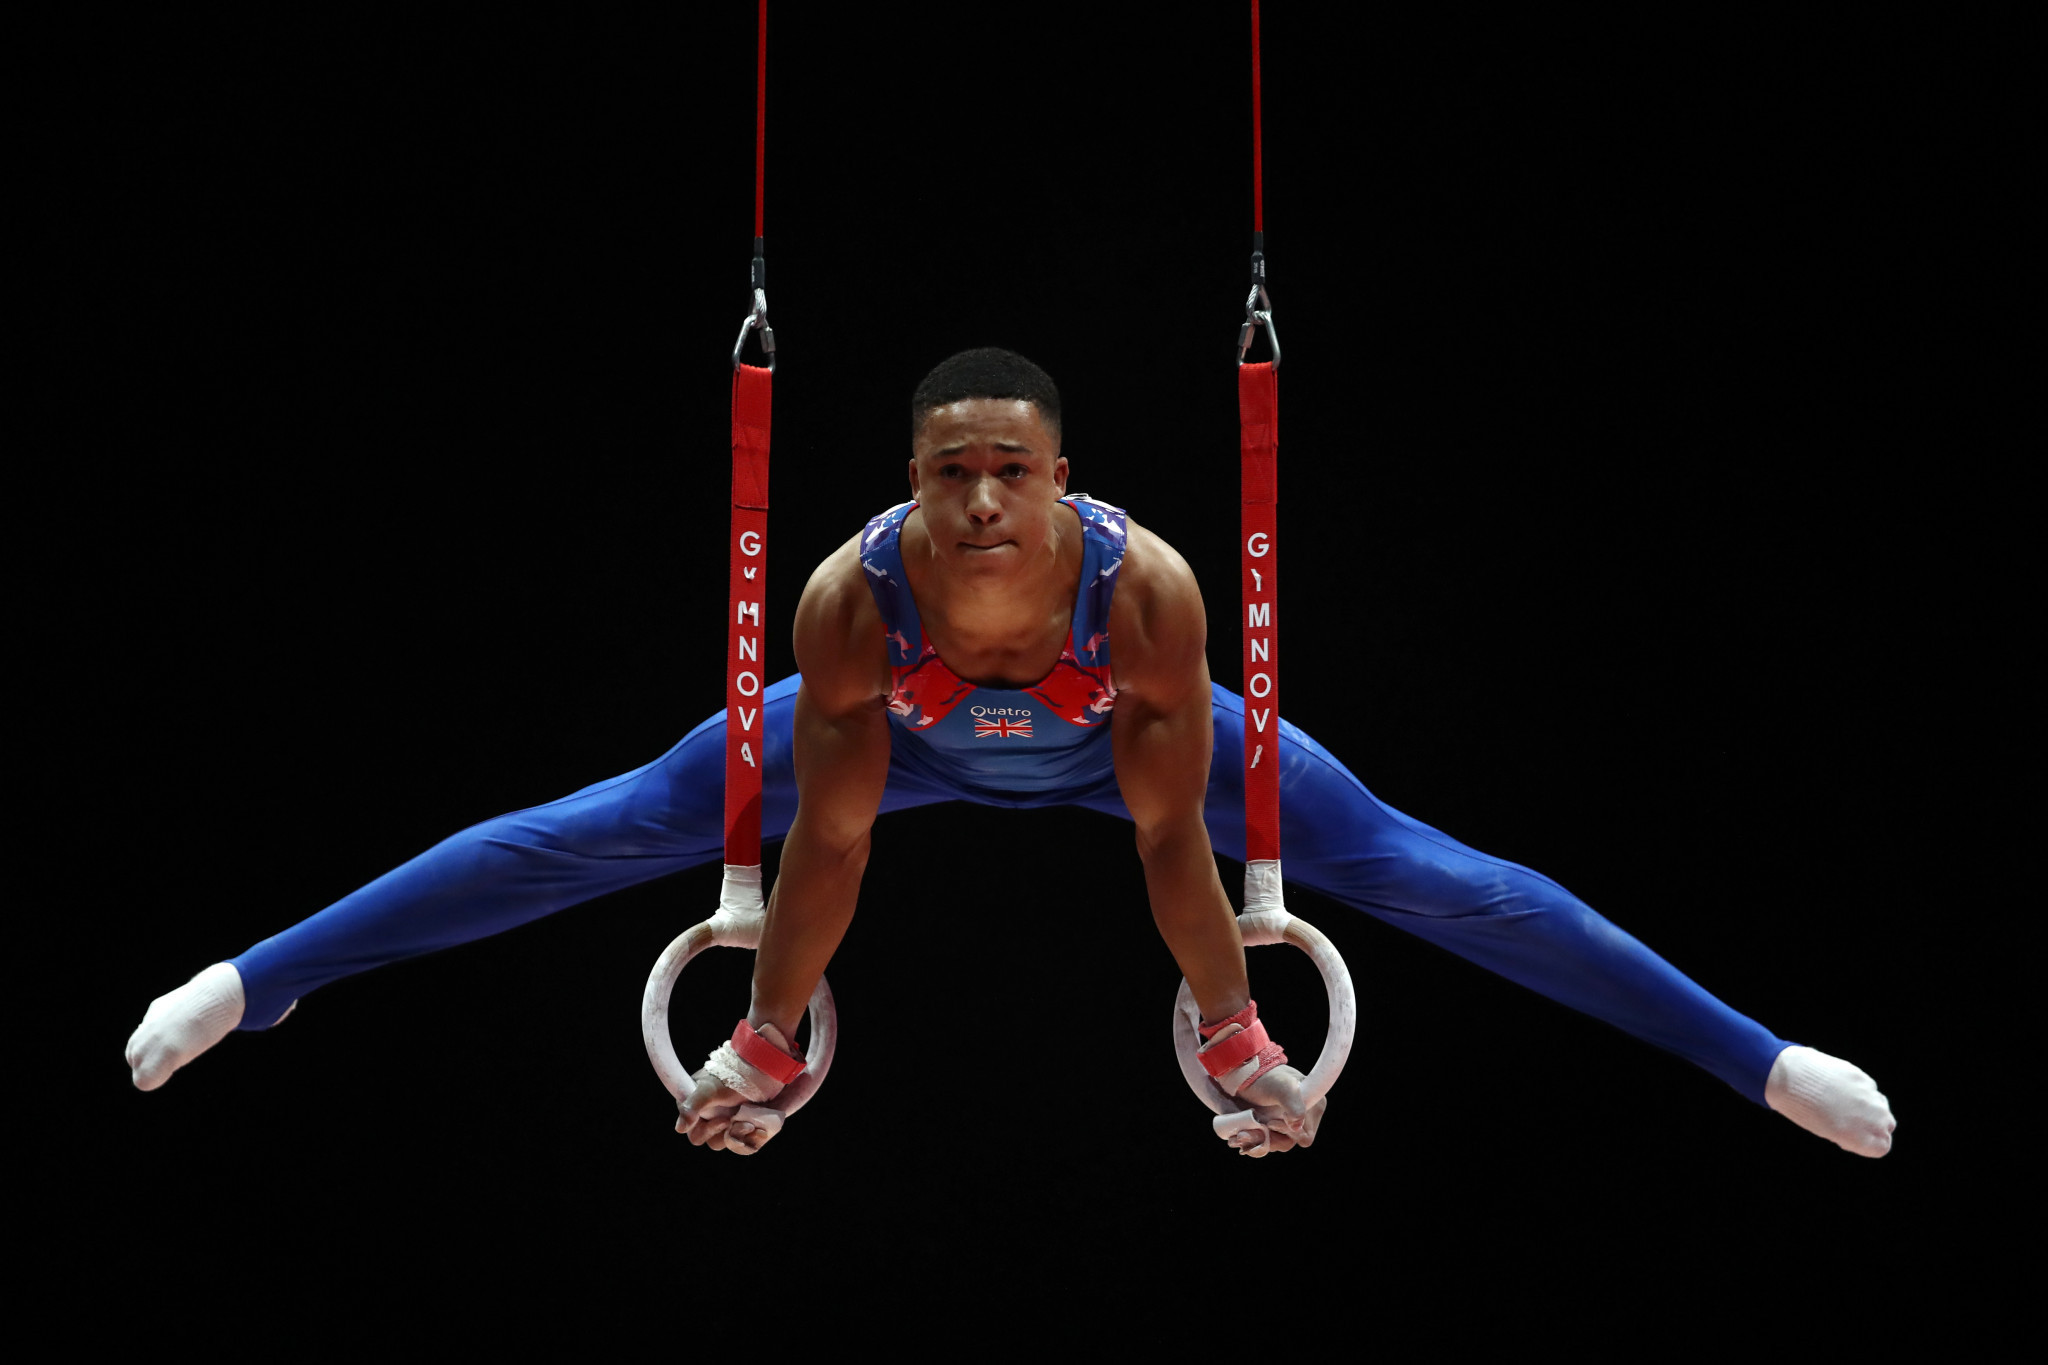 Qualification for the men's team artistic gymnastics final took place today ©Getty Images